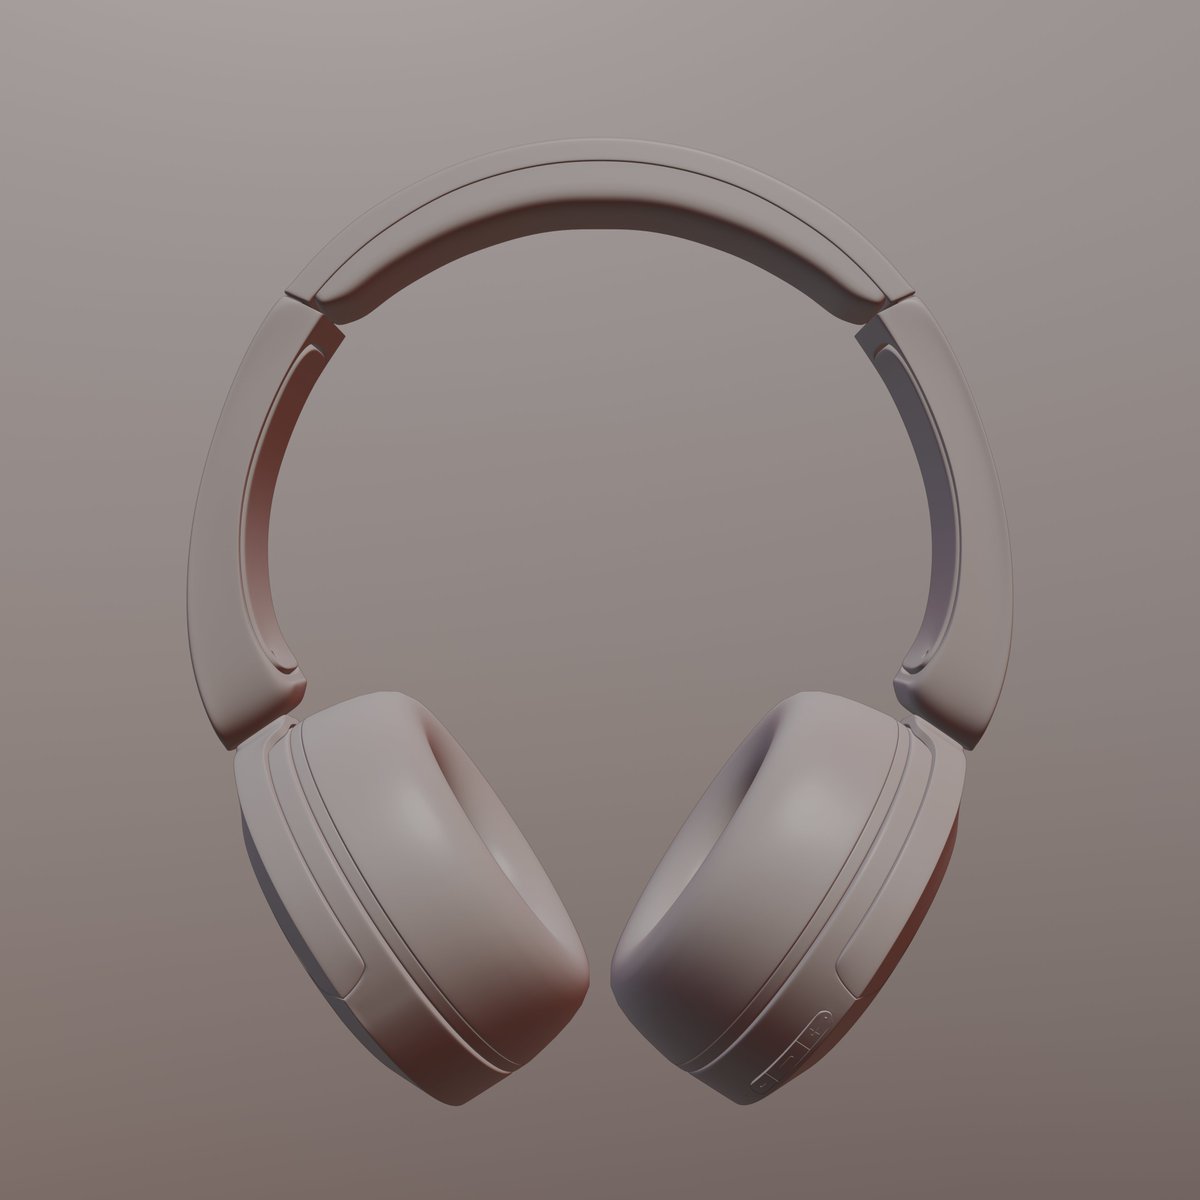 Finished the headphones, they're not perfect but I decided to not spend too much time trying to perfect everything. Was definitely a good modelling exercise :)

#b3d #blender #blender3d #headphones #3dmodeling #cyclesrender #3drender